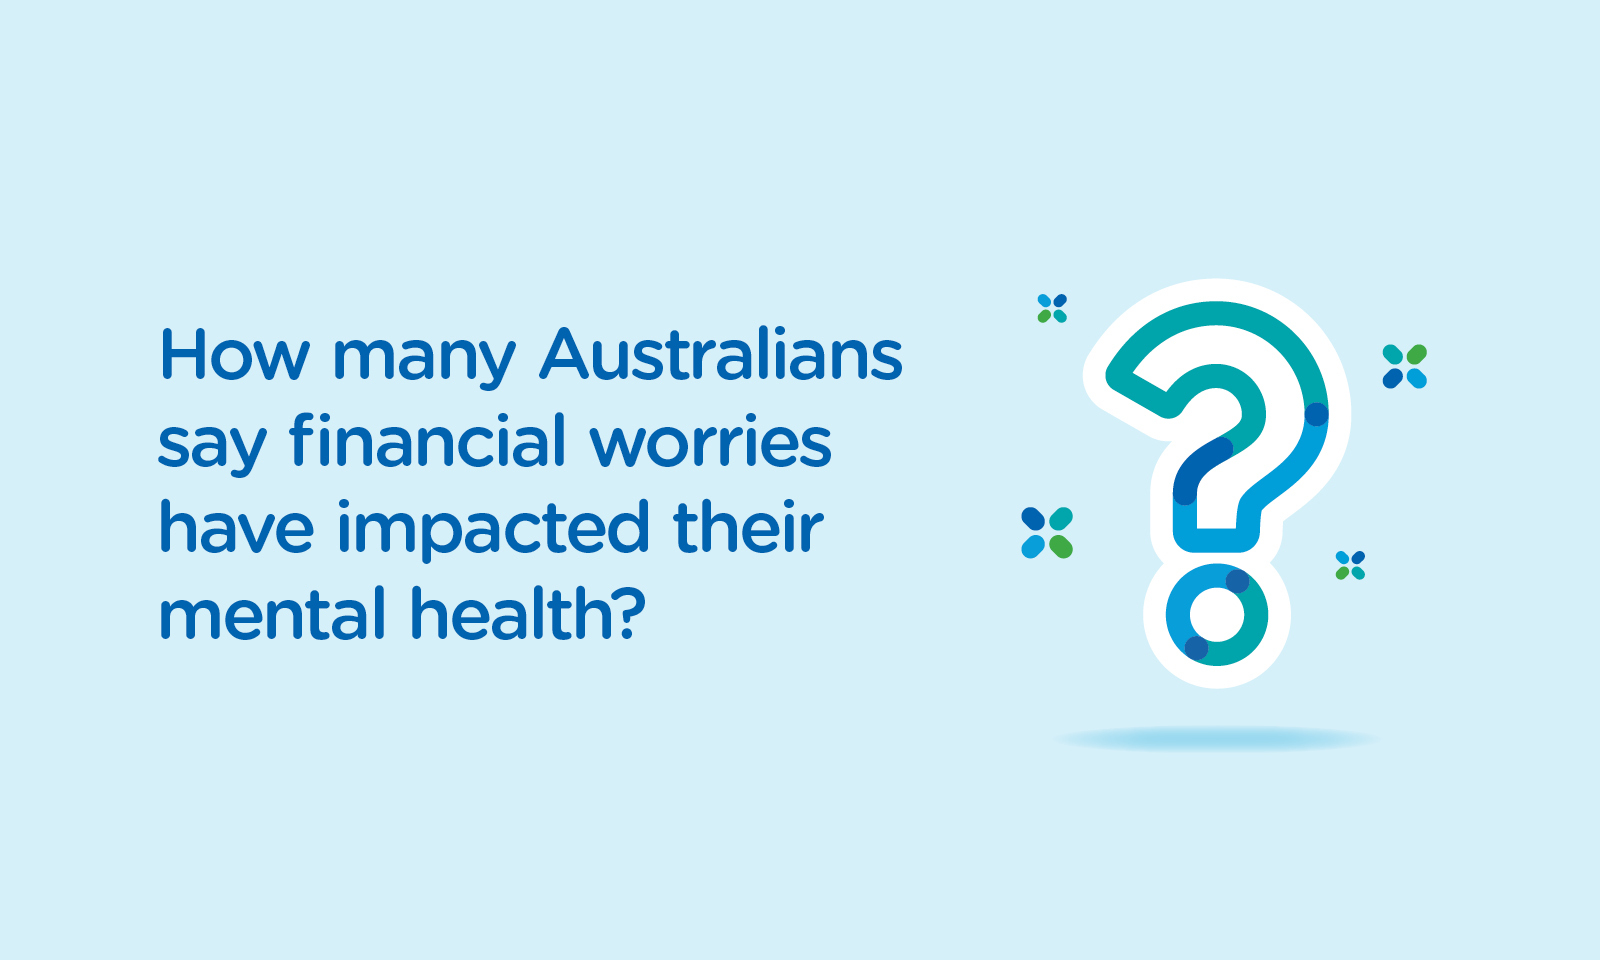 How many Australians say financial worries have impacted their mental health?